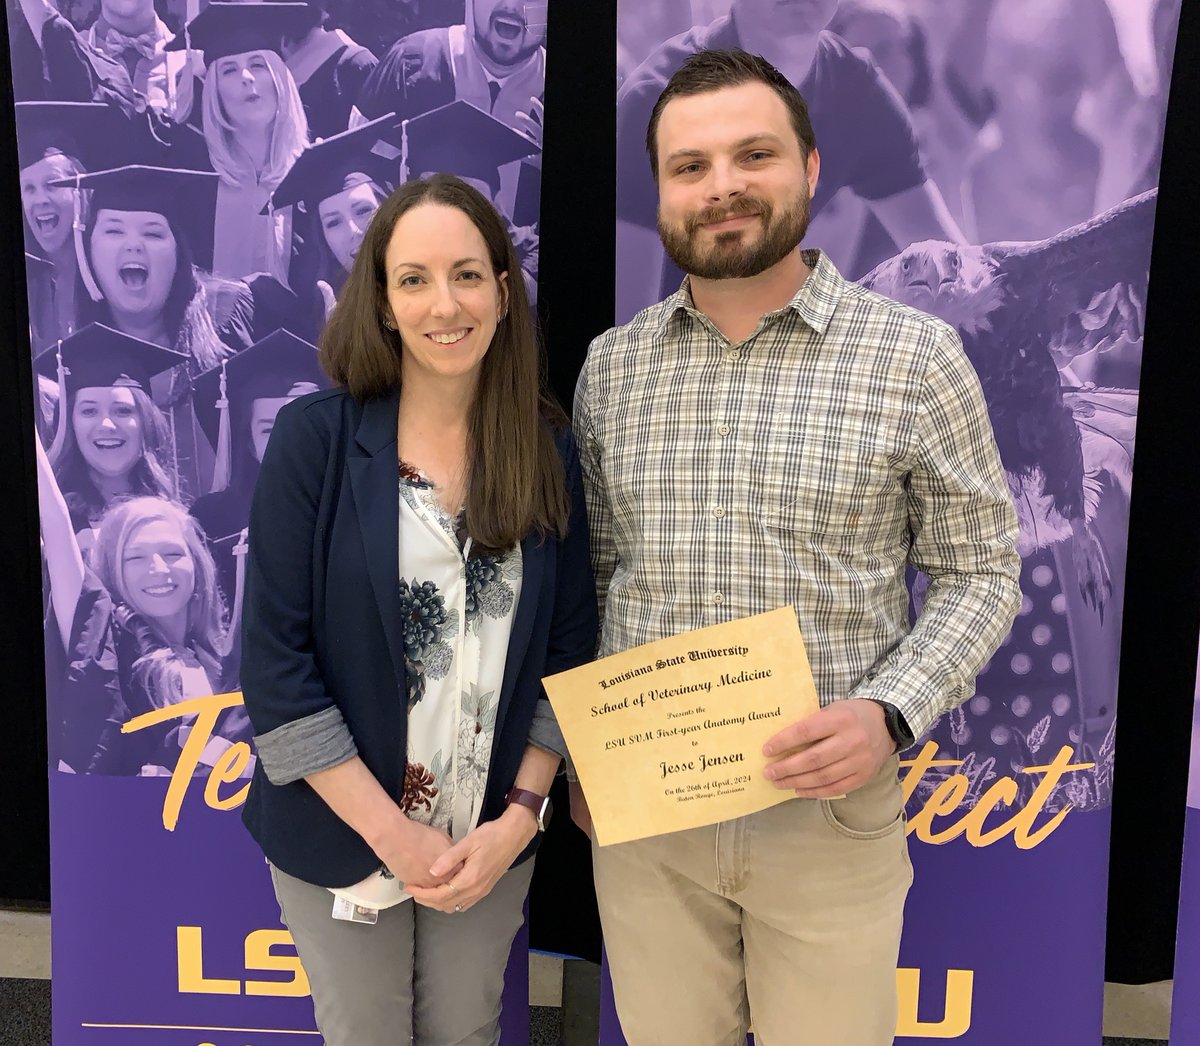 Scholarships help students to achieve their dream of a career in veterinary medicine. We celebrated our scholarship recipients in our Years I-III classes recently, and we sincerely thank the donors who helped make this happen for our students! #BetteringLives #LSUVetMed